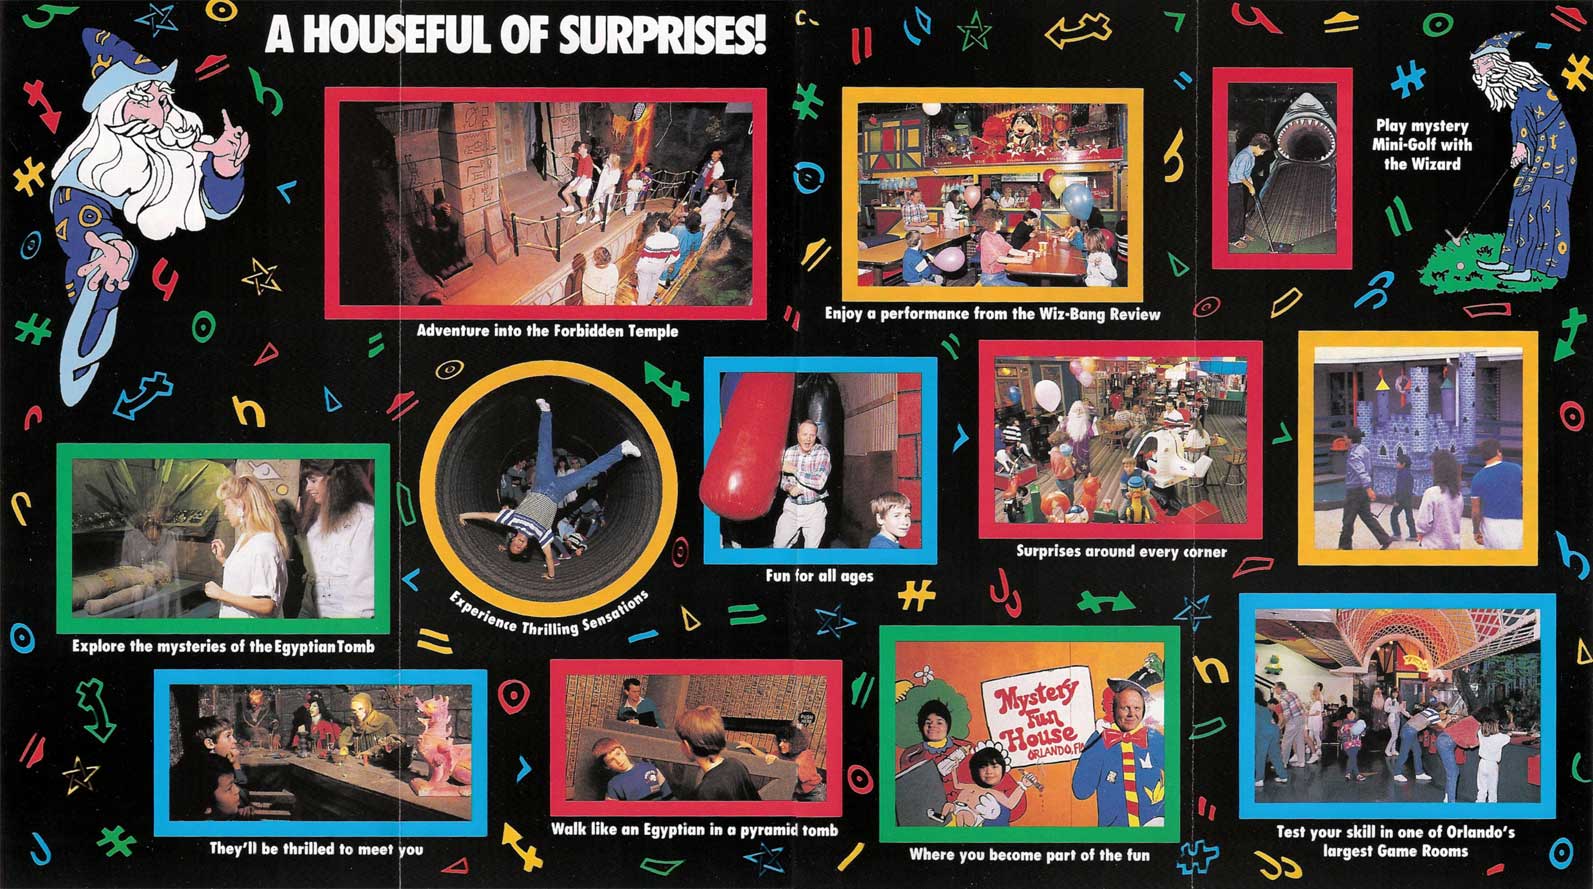 a brochure for the second incarnation of the Mystery Fun House